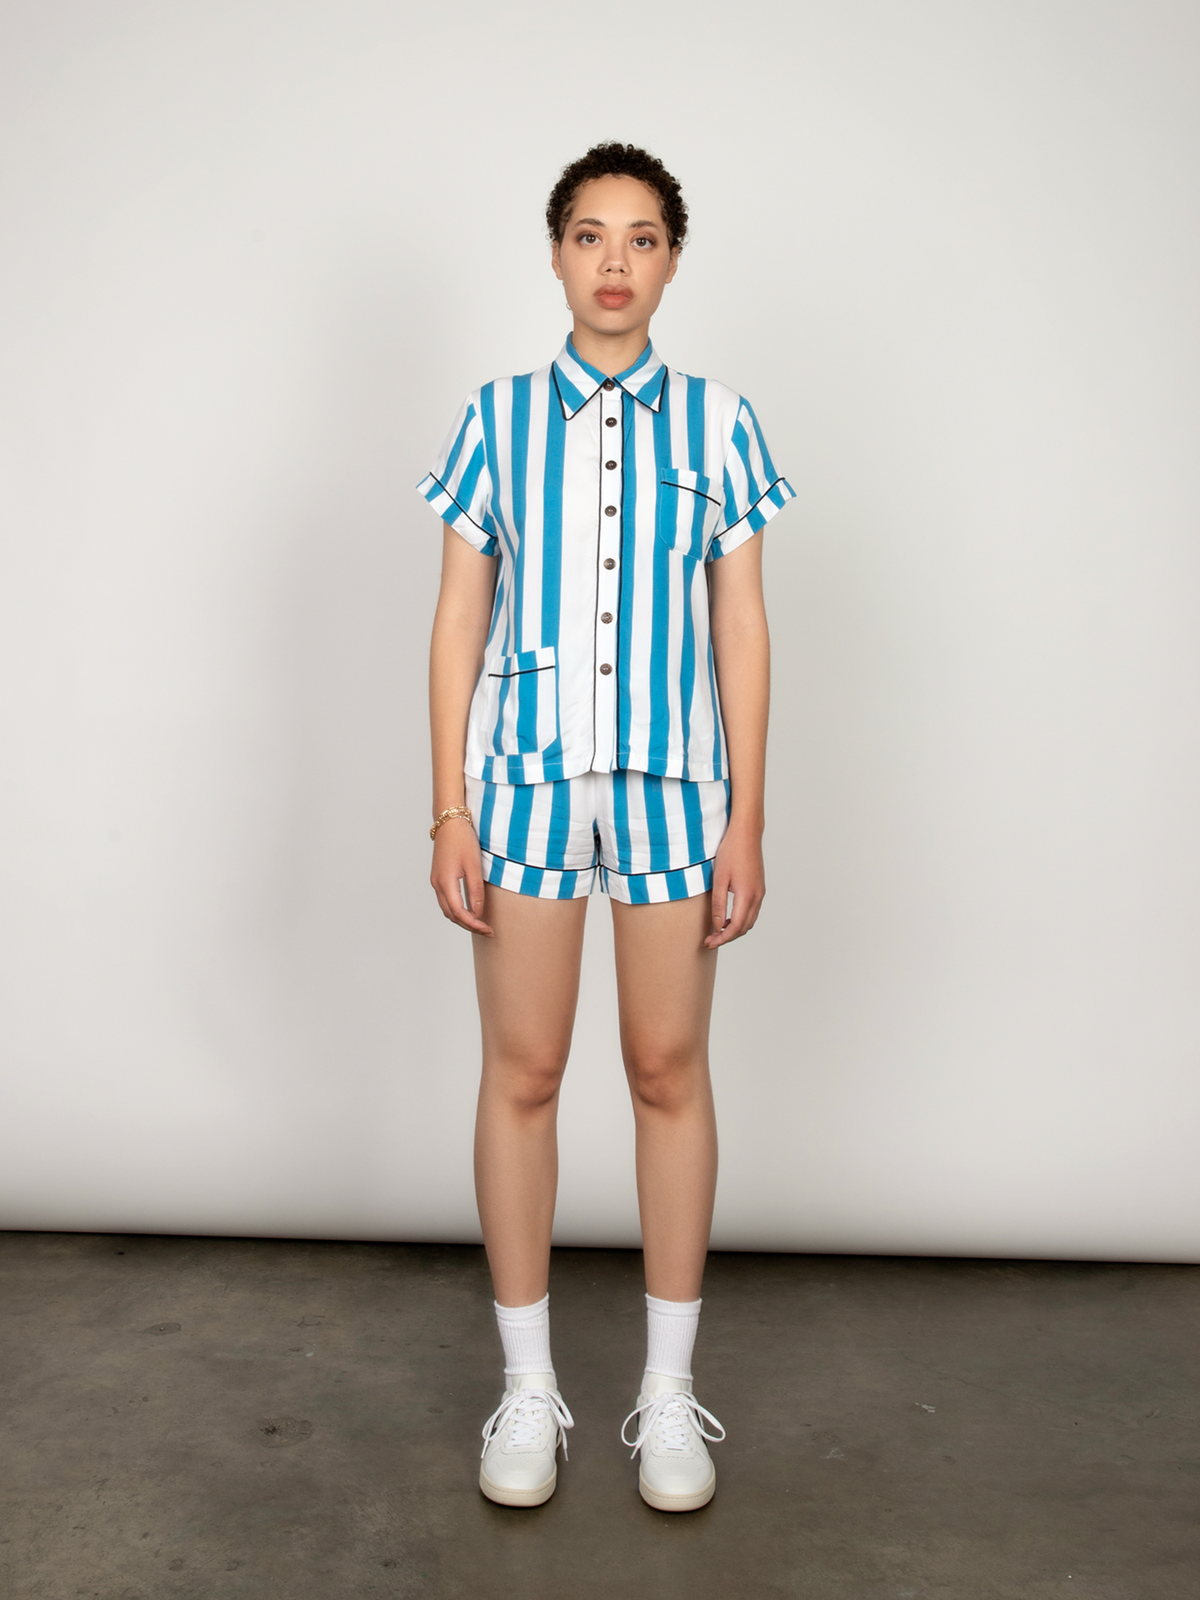 Woman wears a blue and white striped short-sleeved pajama set.